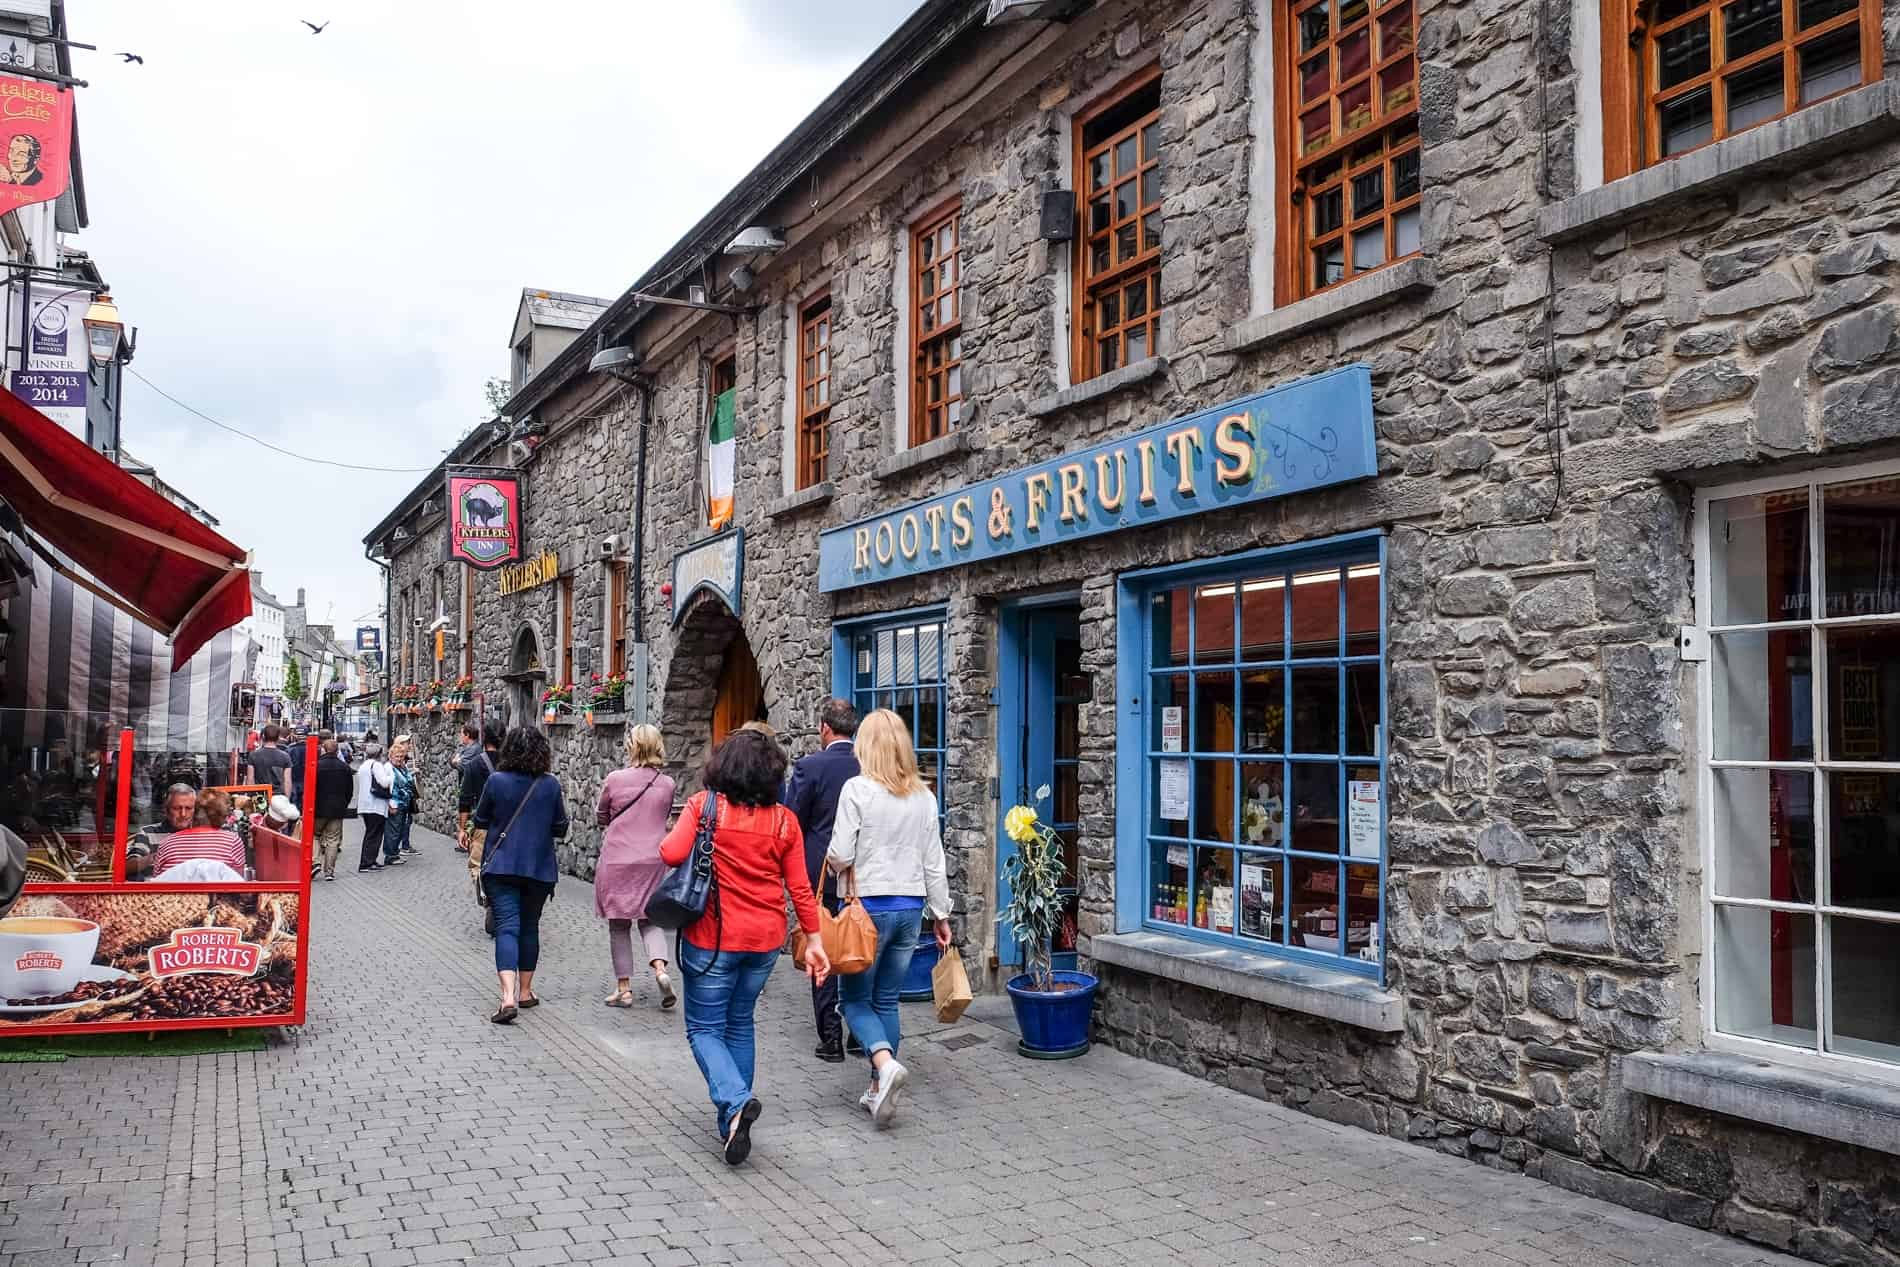 Medieval St Kierens Street in Kilkenny lined with pubs.